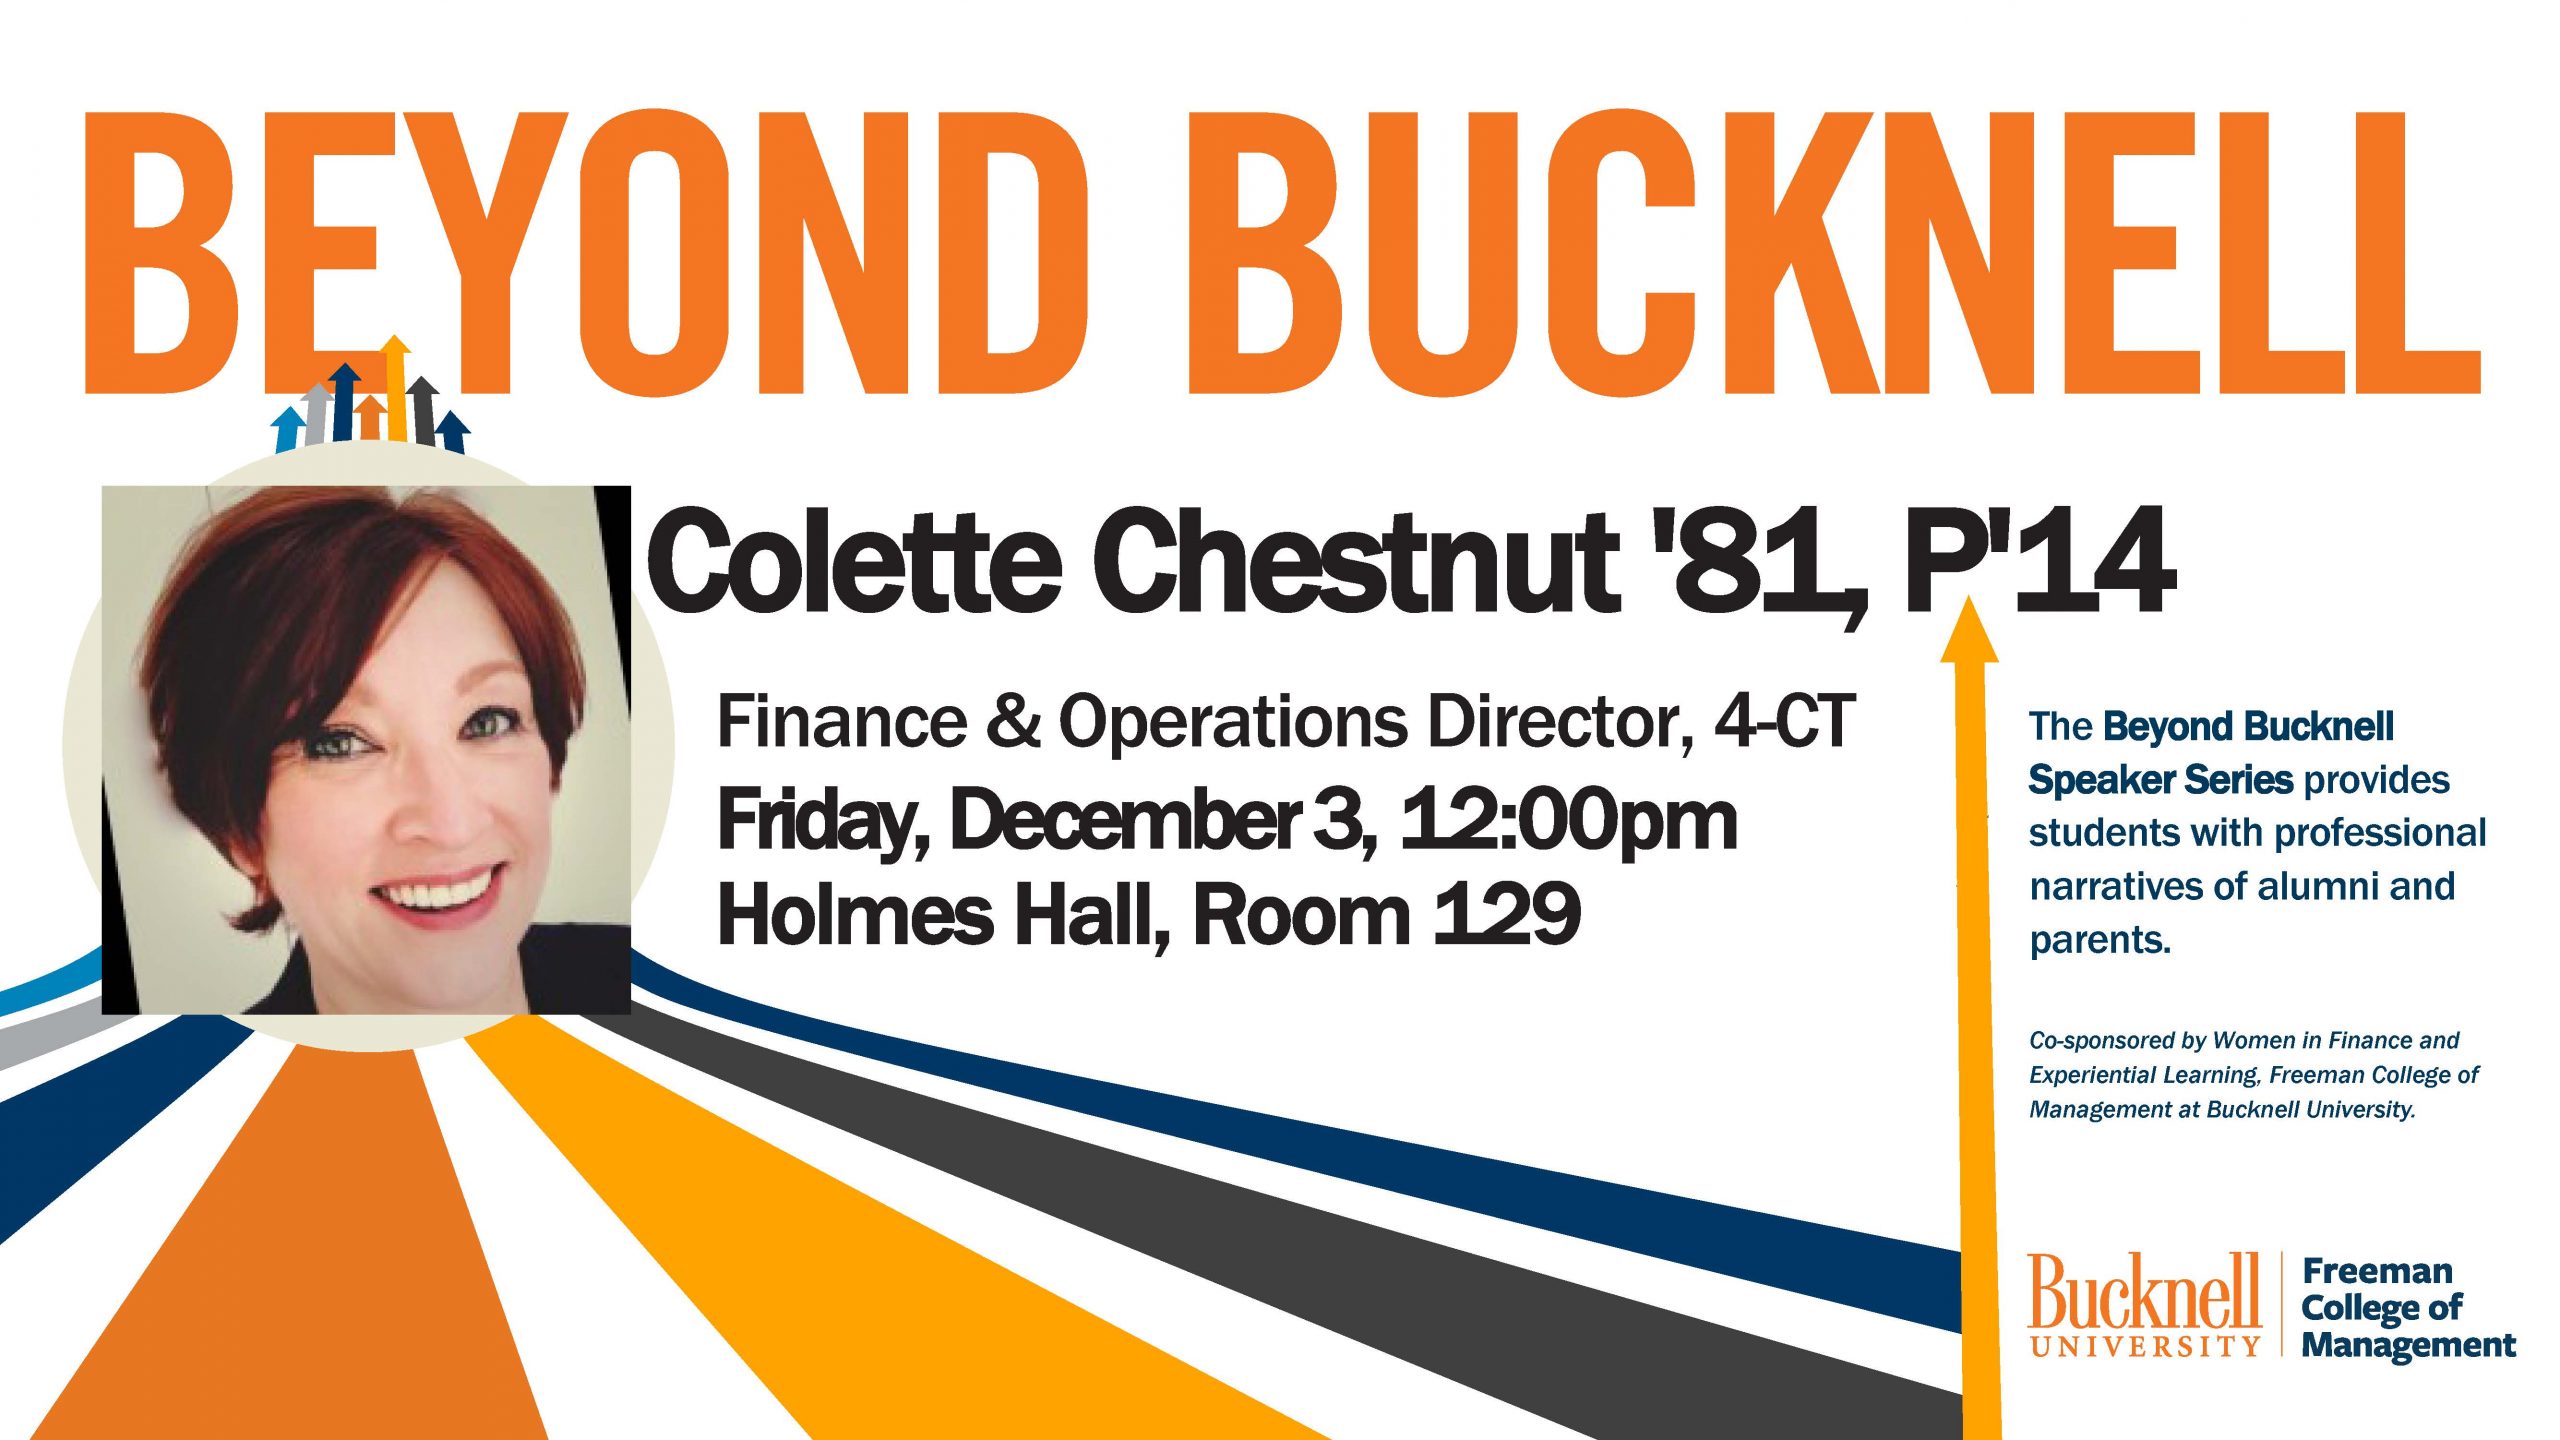 Beyond Bucknell Speaker Series presents Colette Chestnut, Finance and Operations Director @ 4-CT